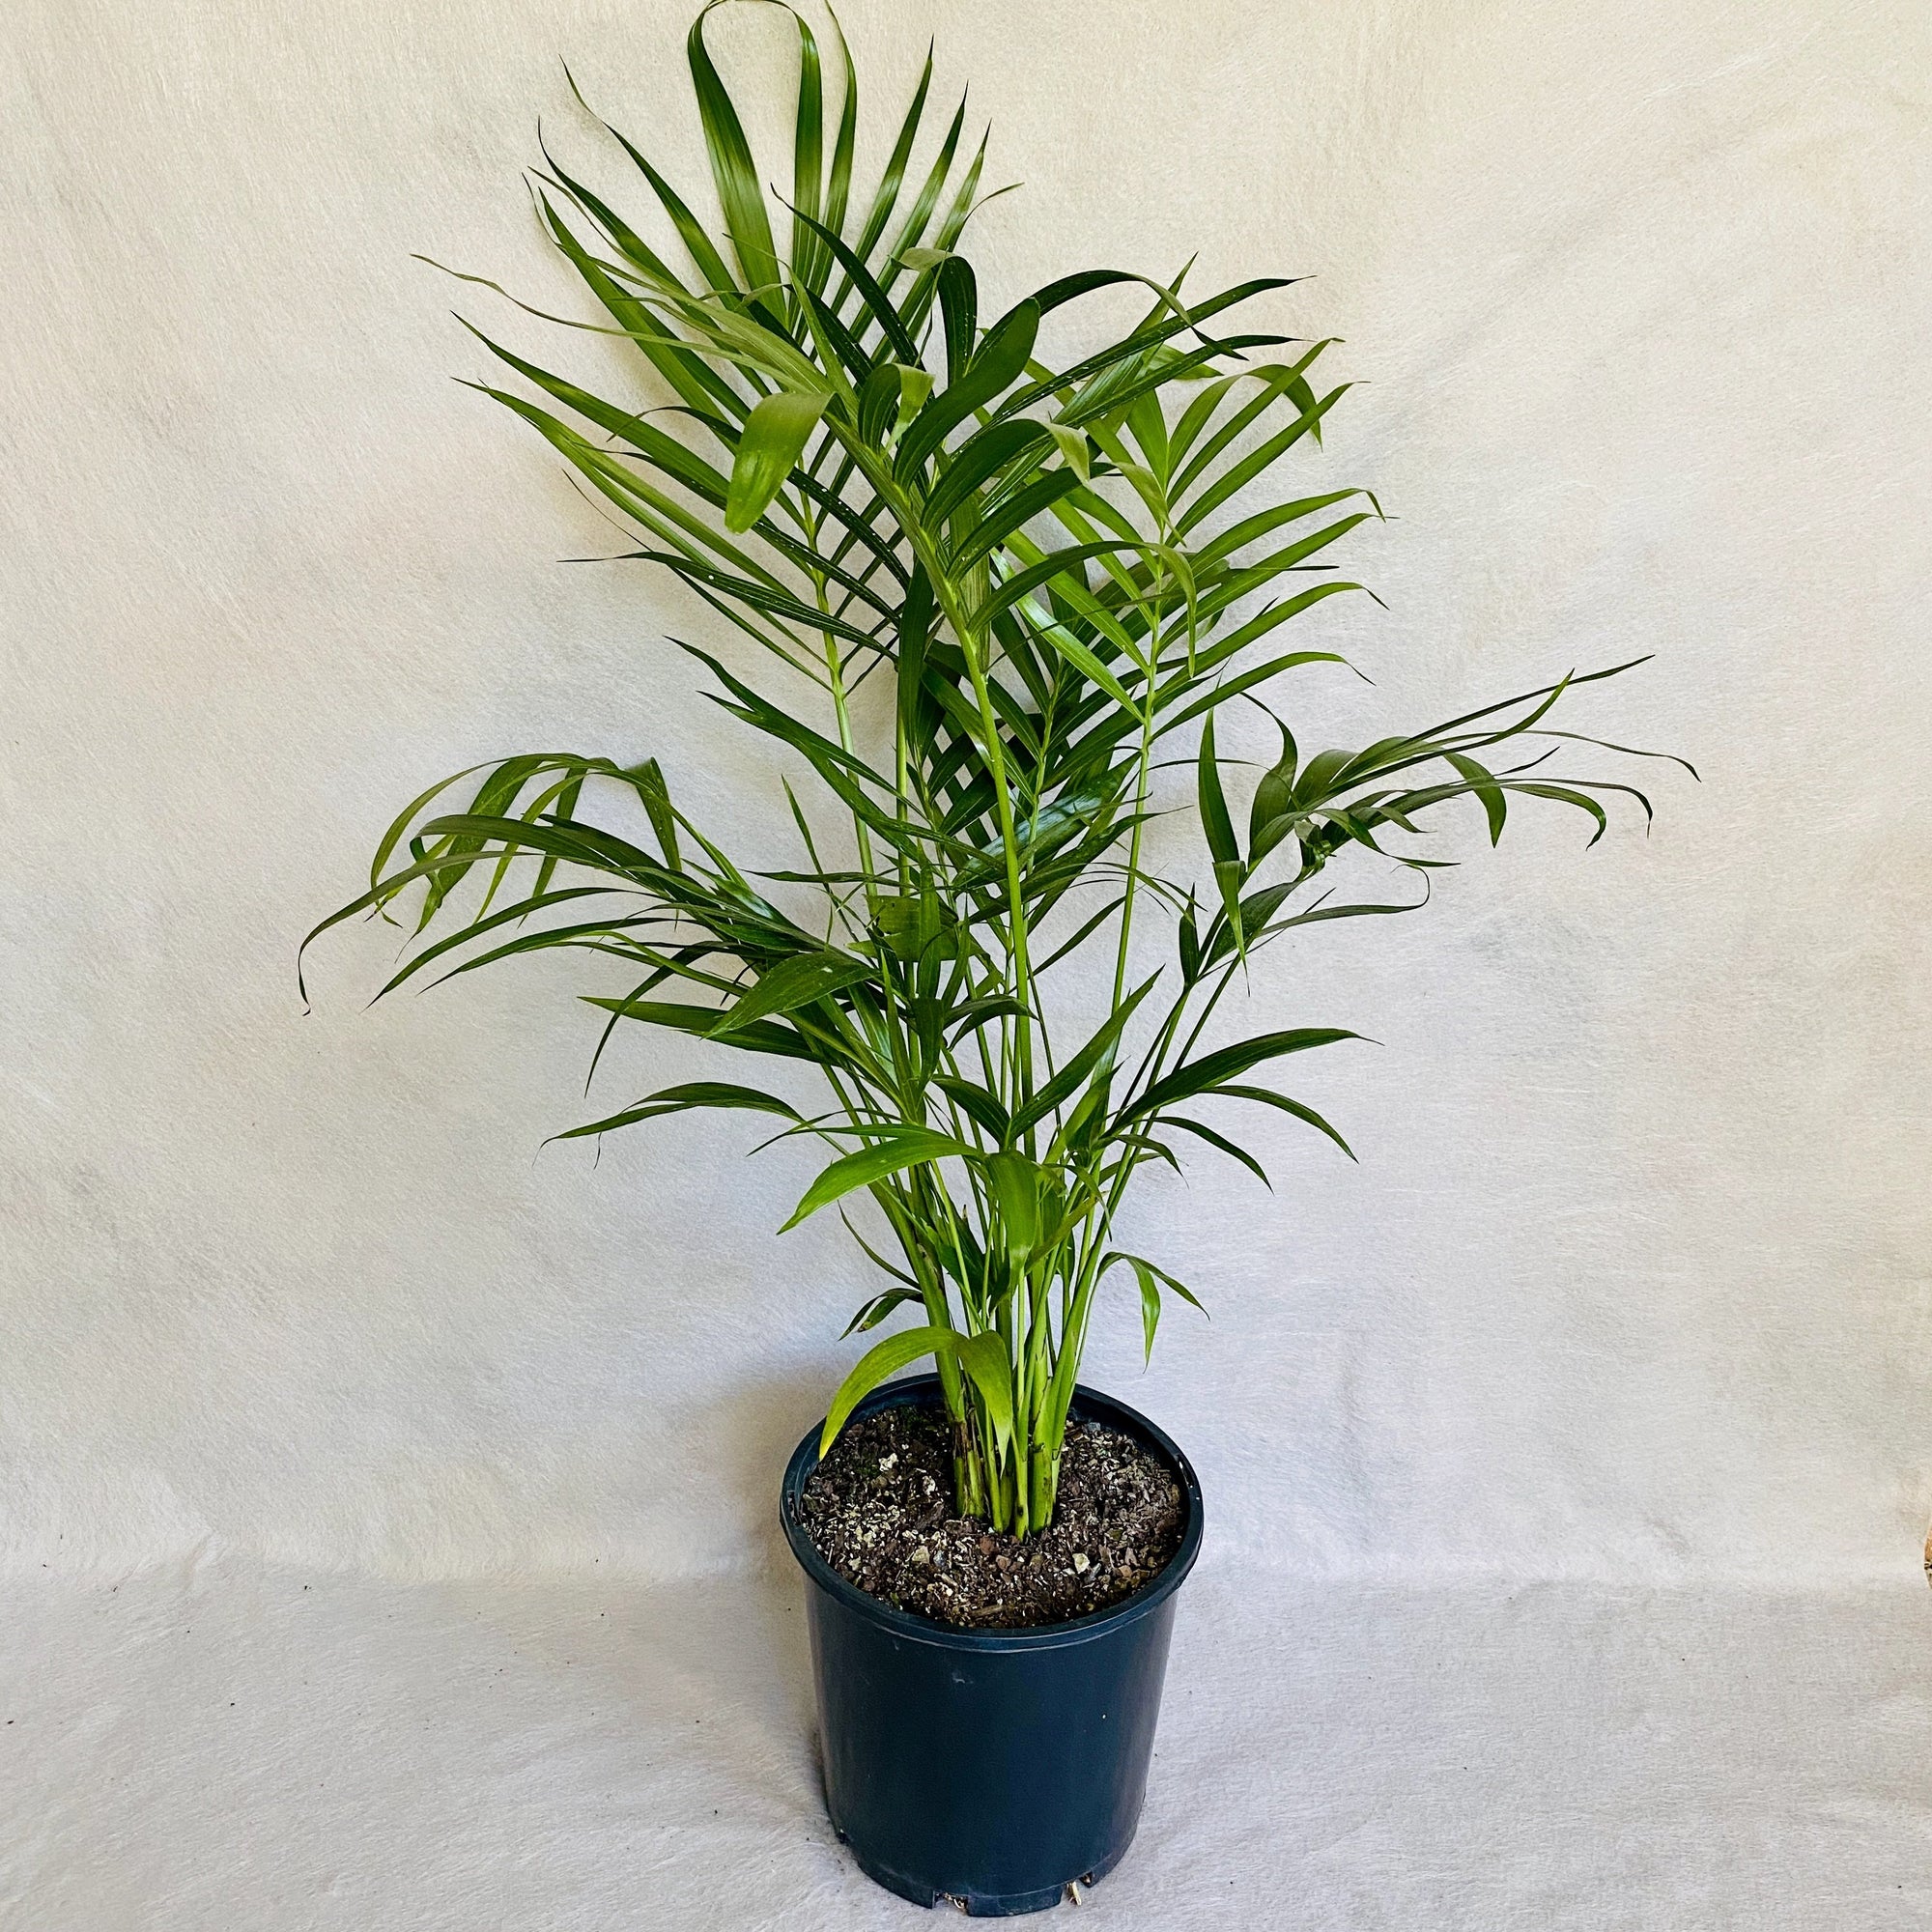 Cascade Palm is a shade loving, compact palm that has glossy green foliage and a cascading form.